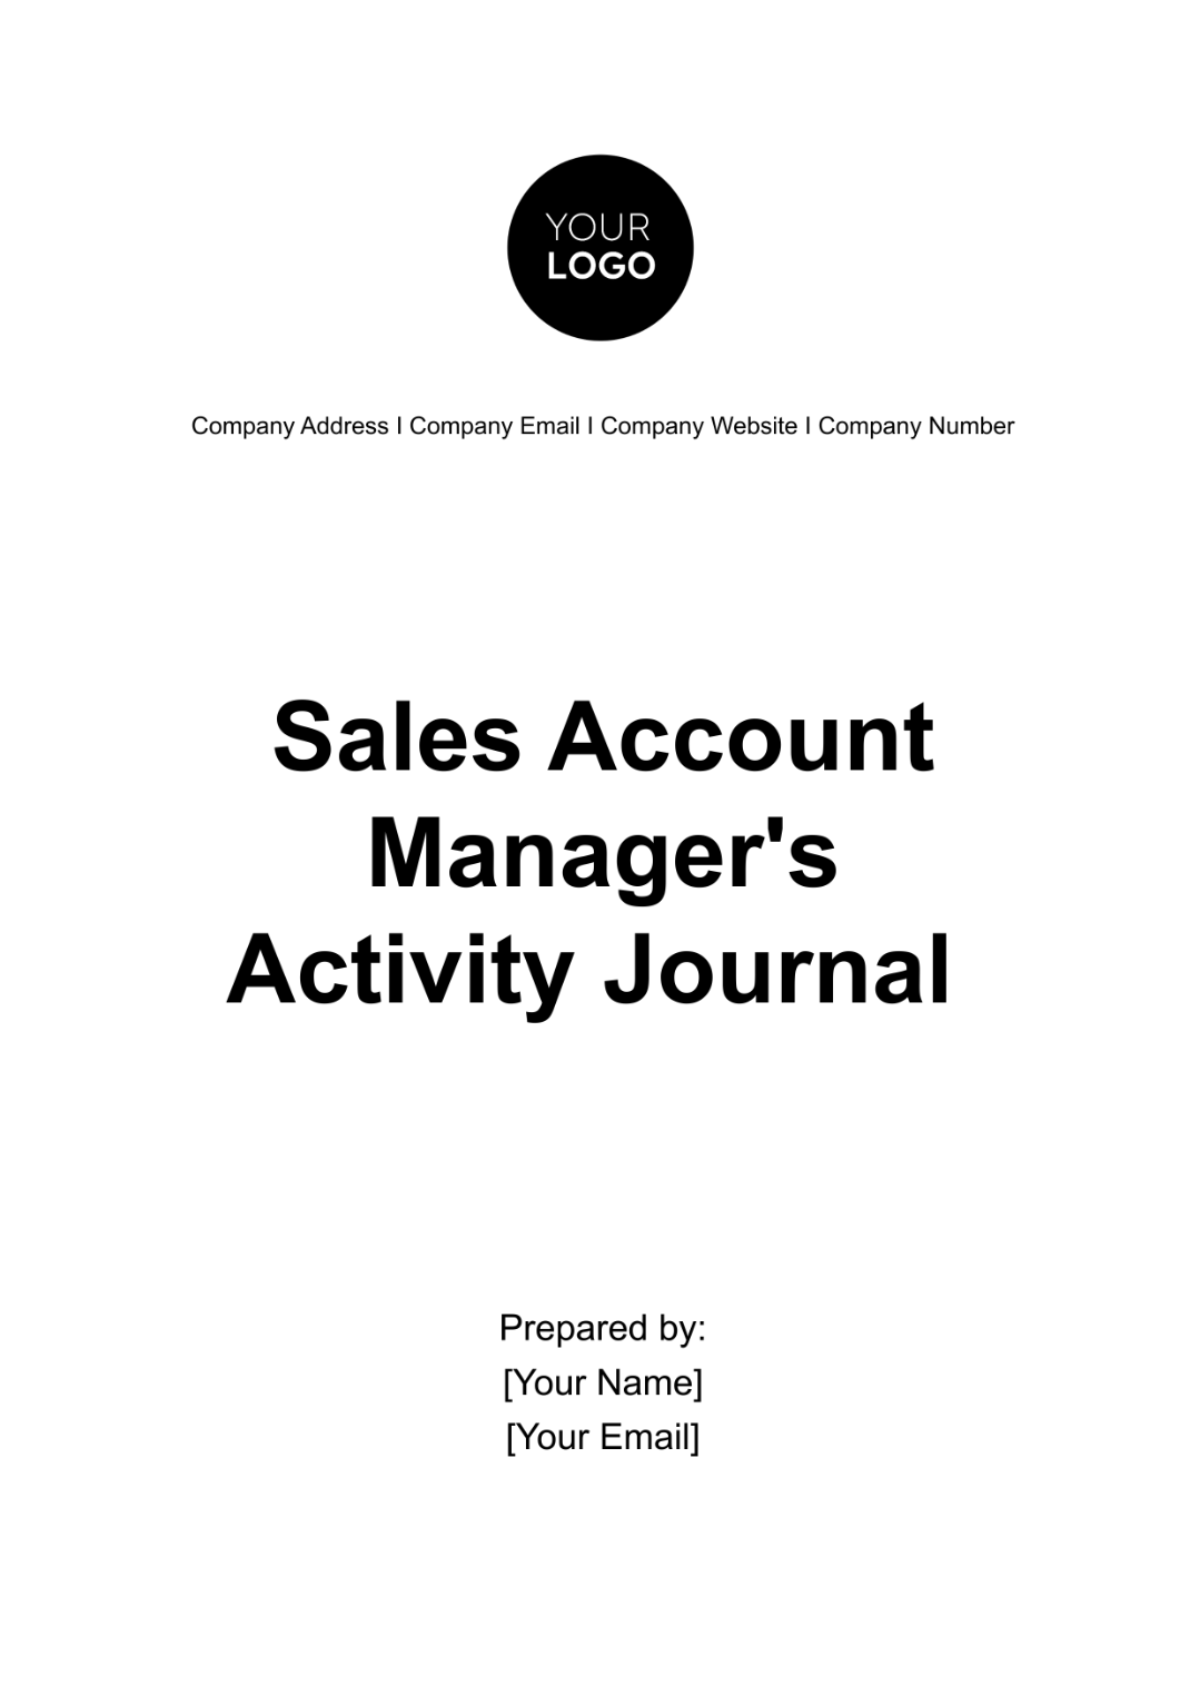 Free Sales Account Manager's Activity Journal Template